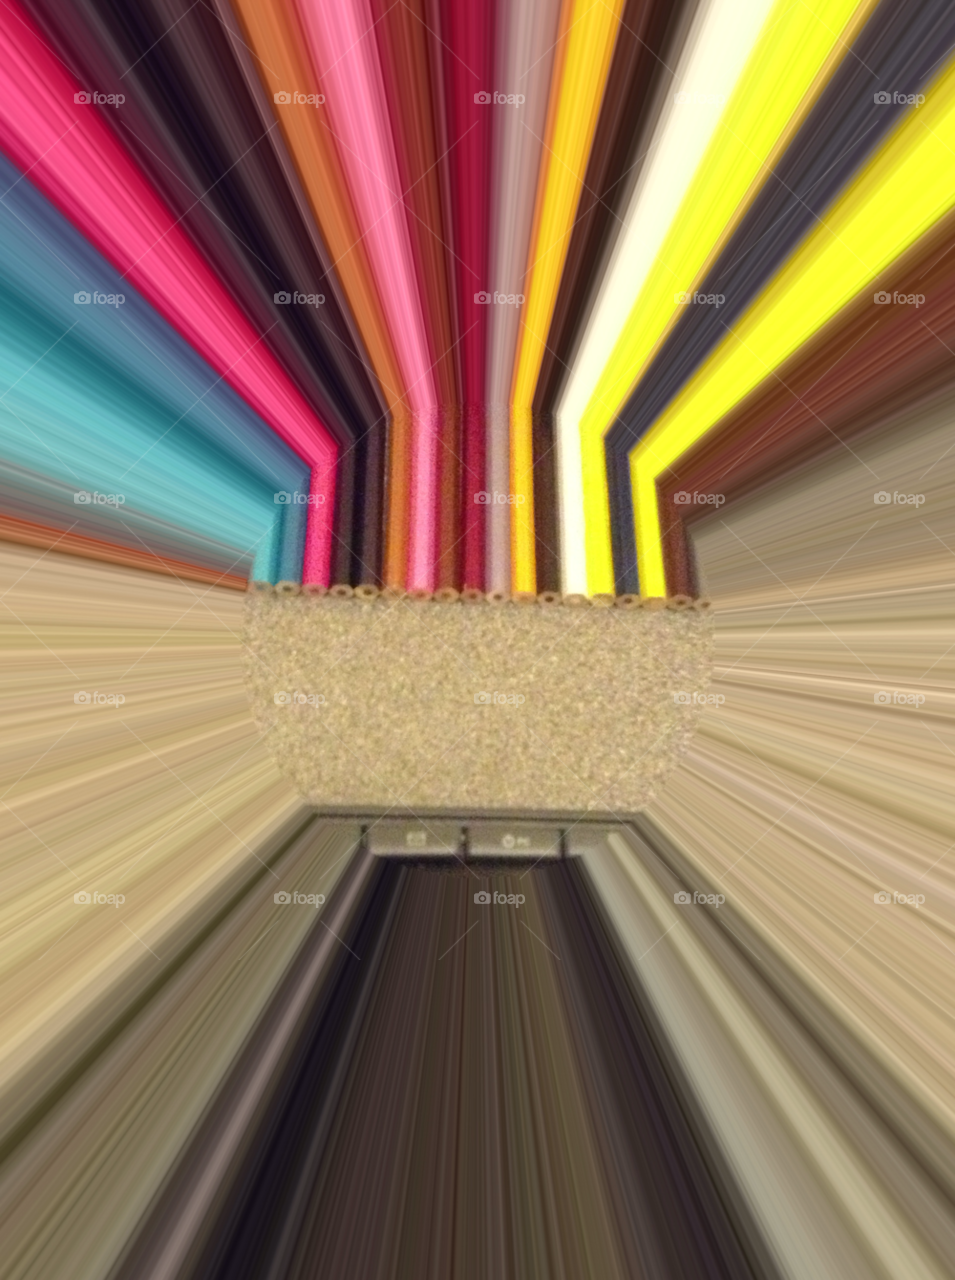 pencils light tunnel by quizknight